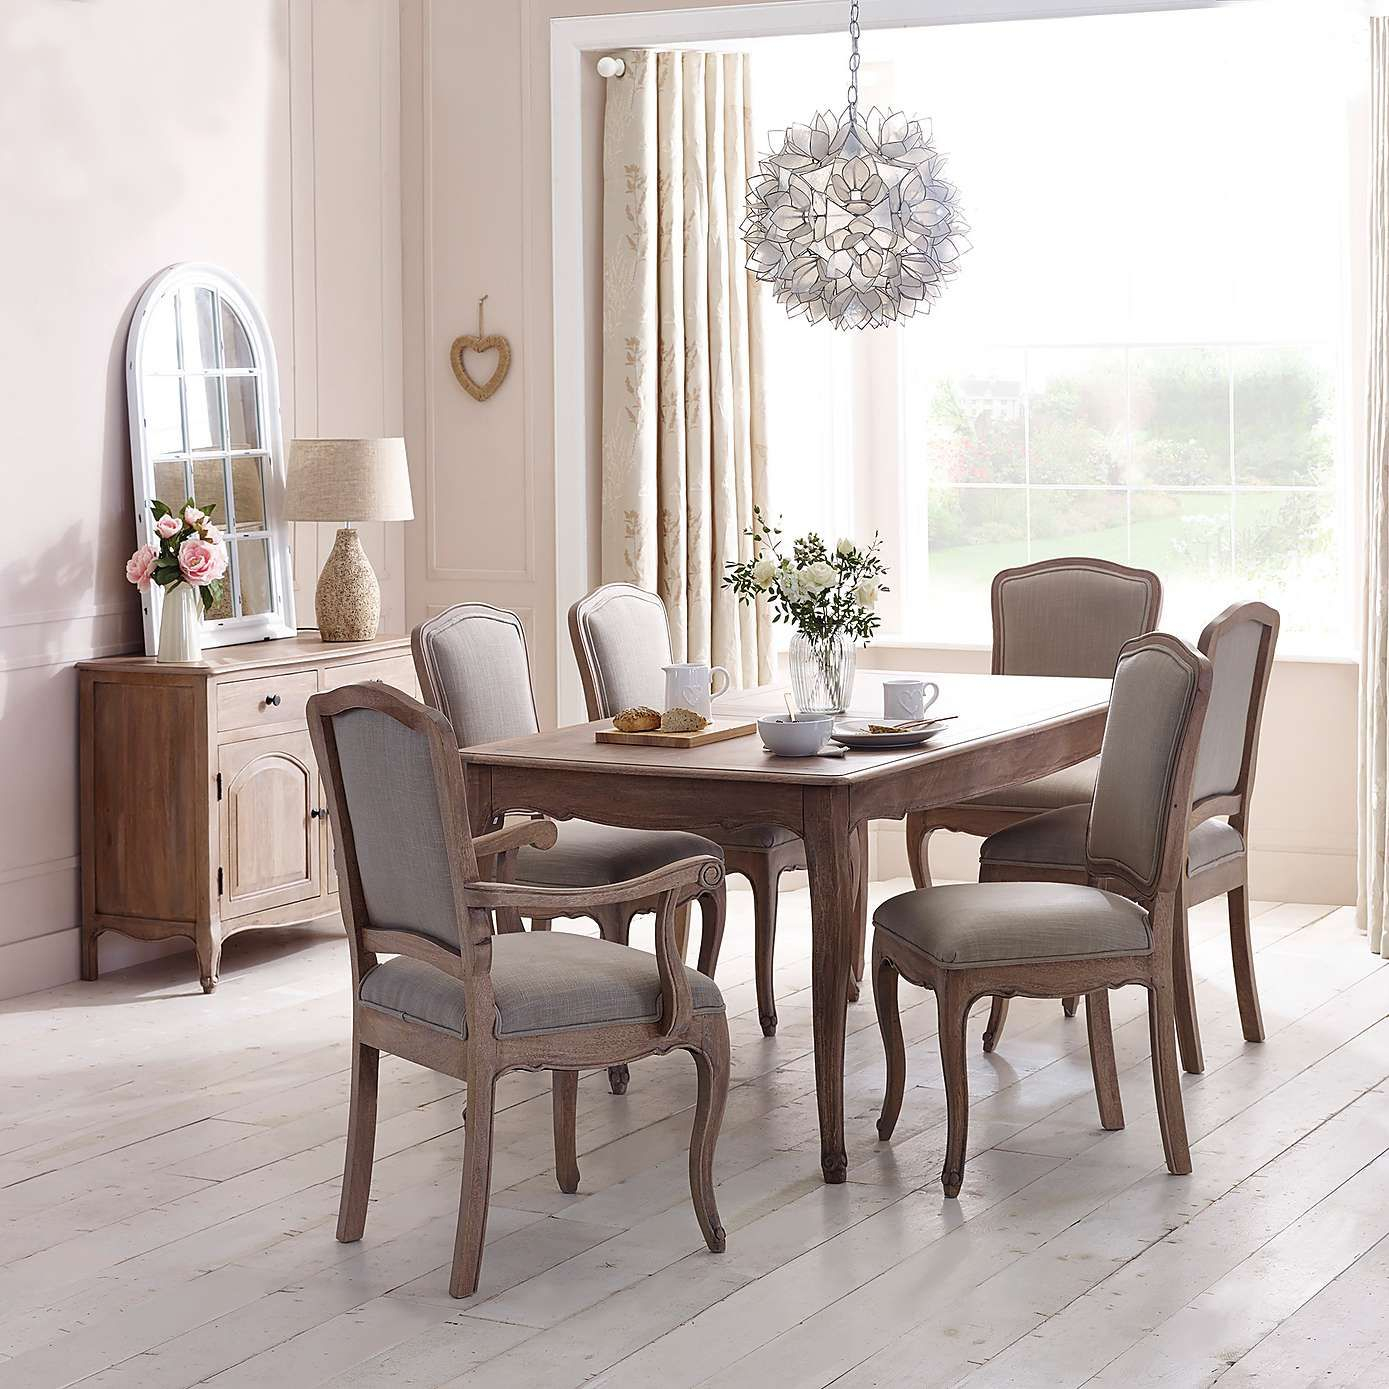 Amelie Extending Dining Table Beauchamp House Extendable within measurements 1389 X 1389